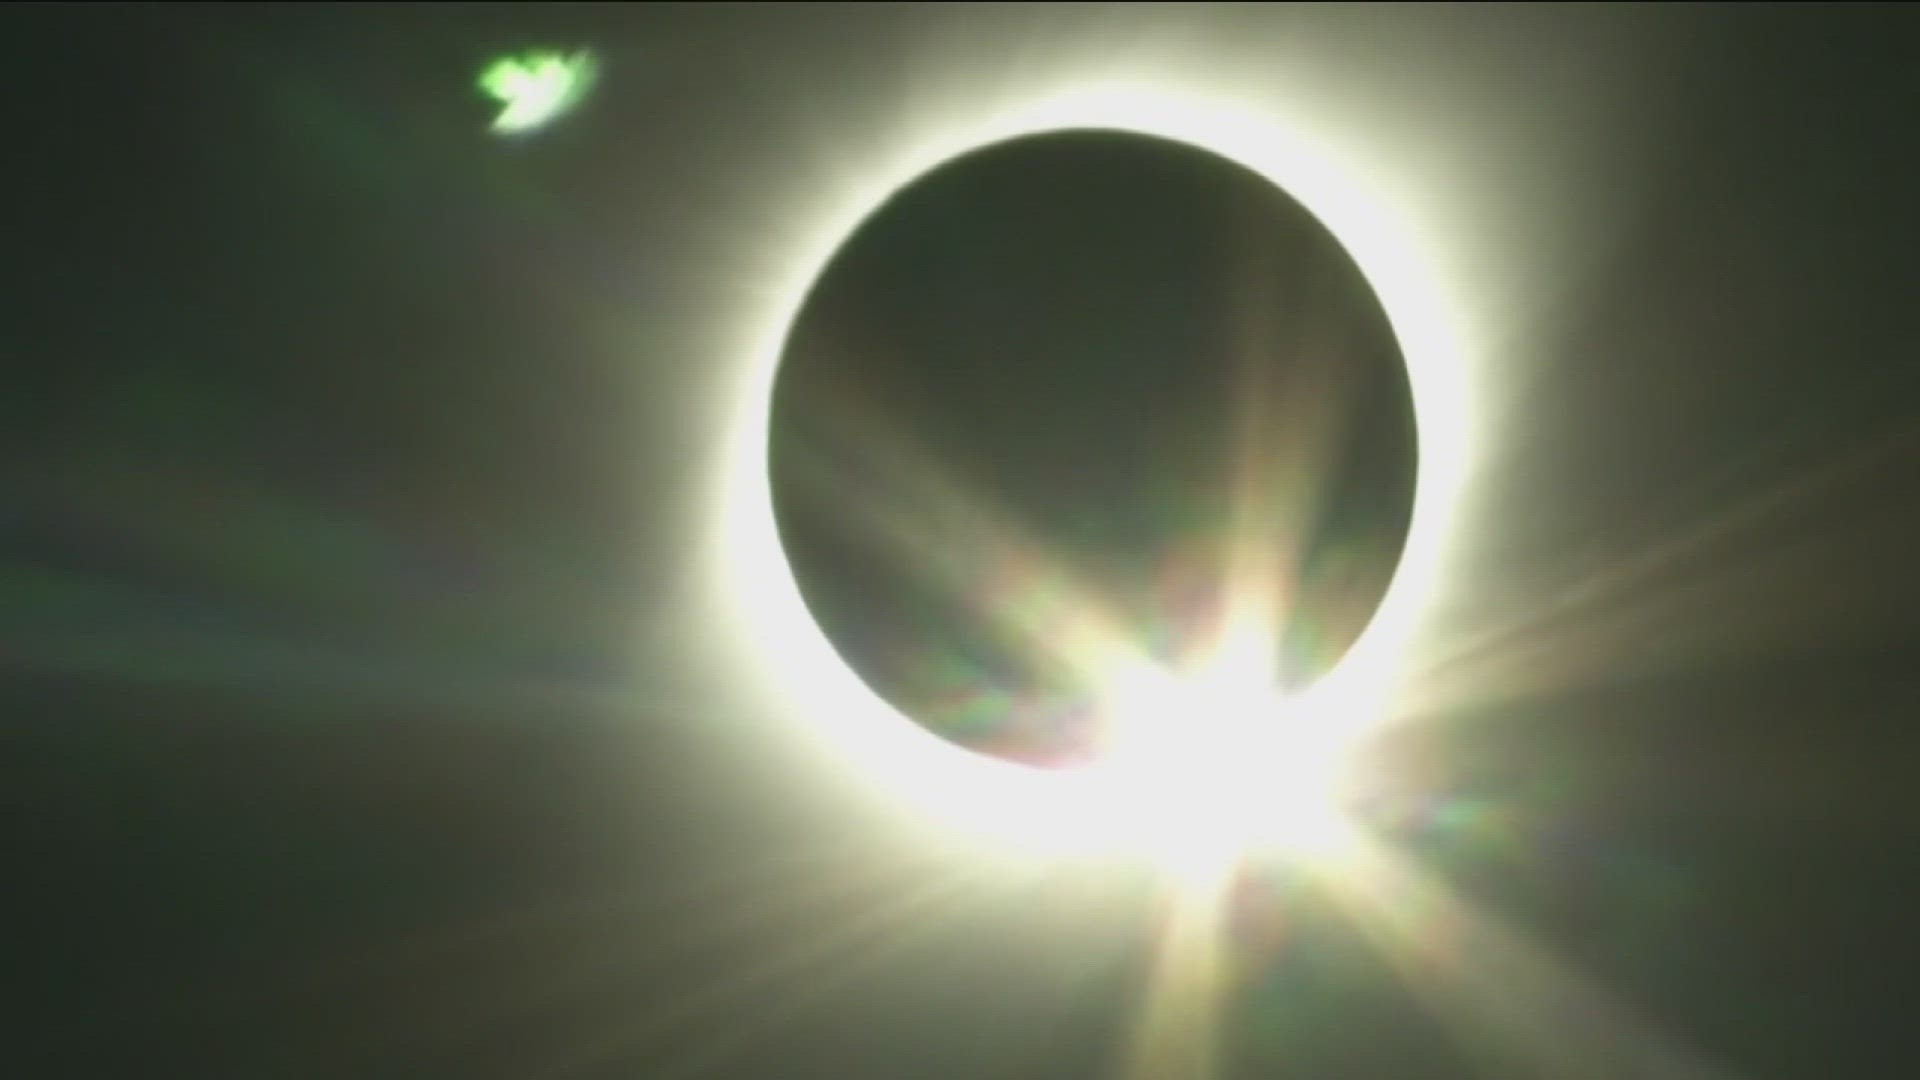 Passengers on two cruises leaving San Diego will be the first to see the total solar eclipse in Mexico.